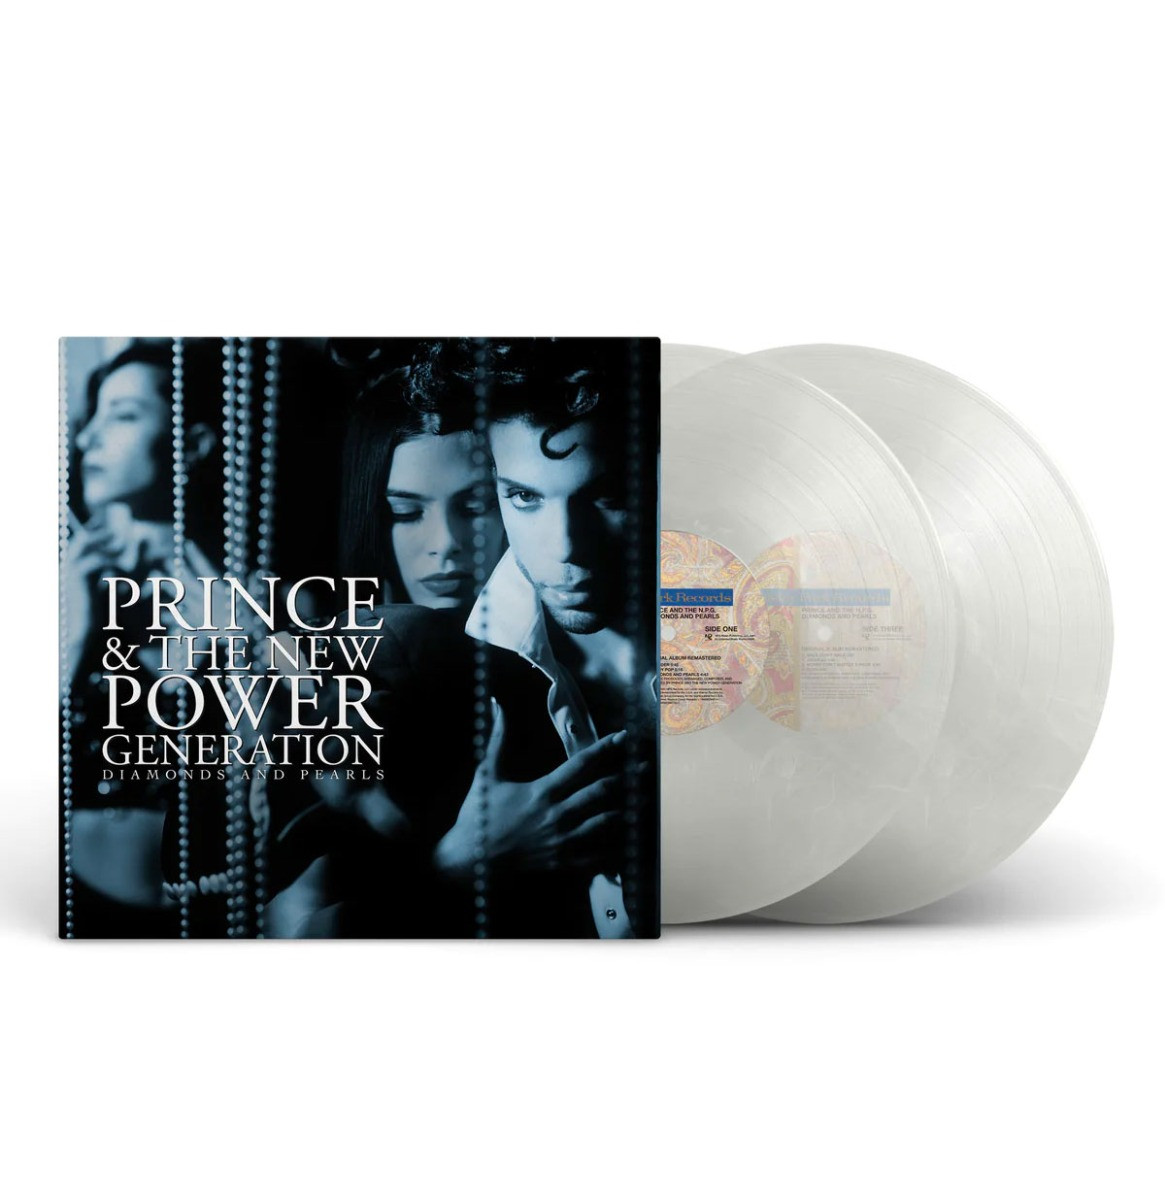 Prince & The New Power Generation - Diamonds And Pearls (Transparant Vinyl) 2LP